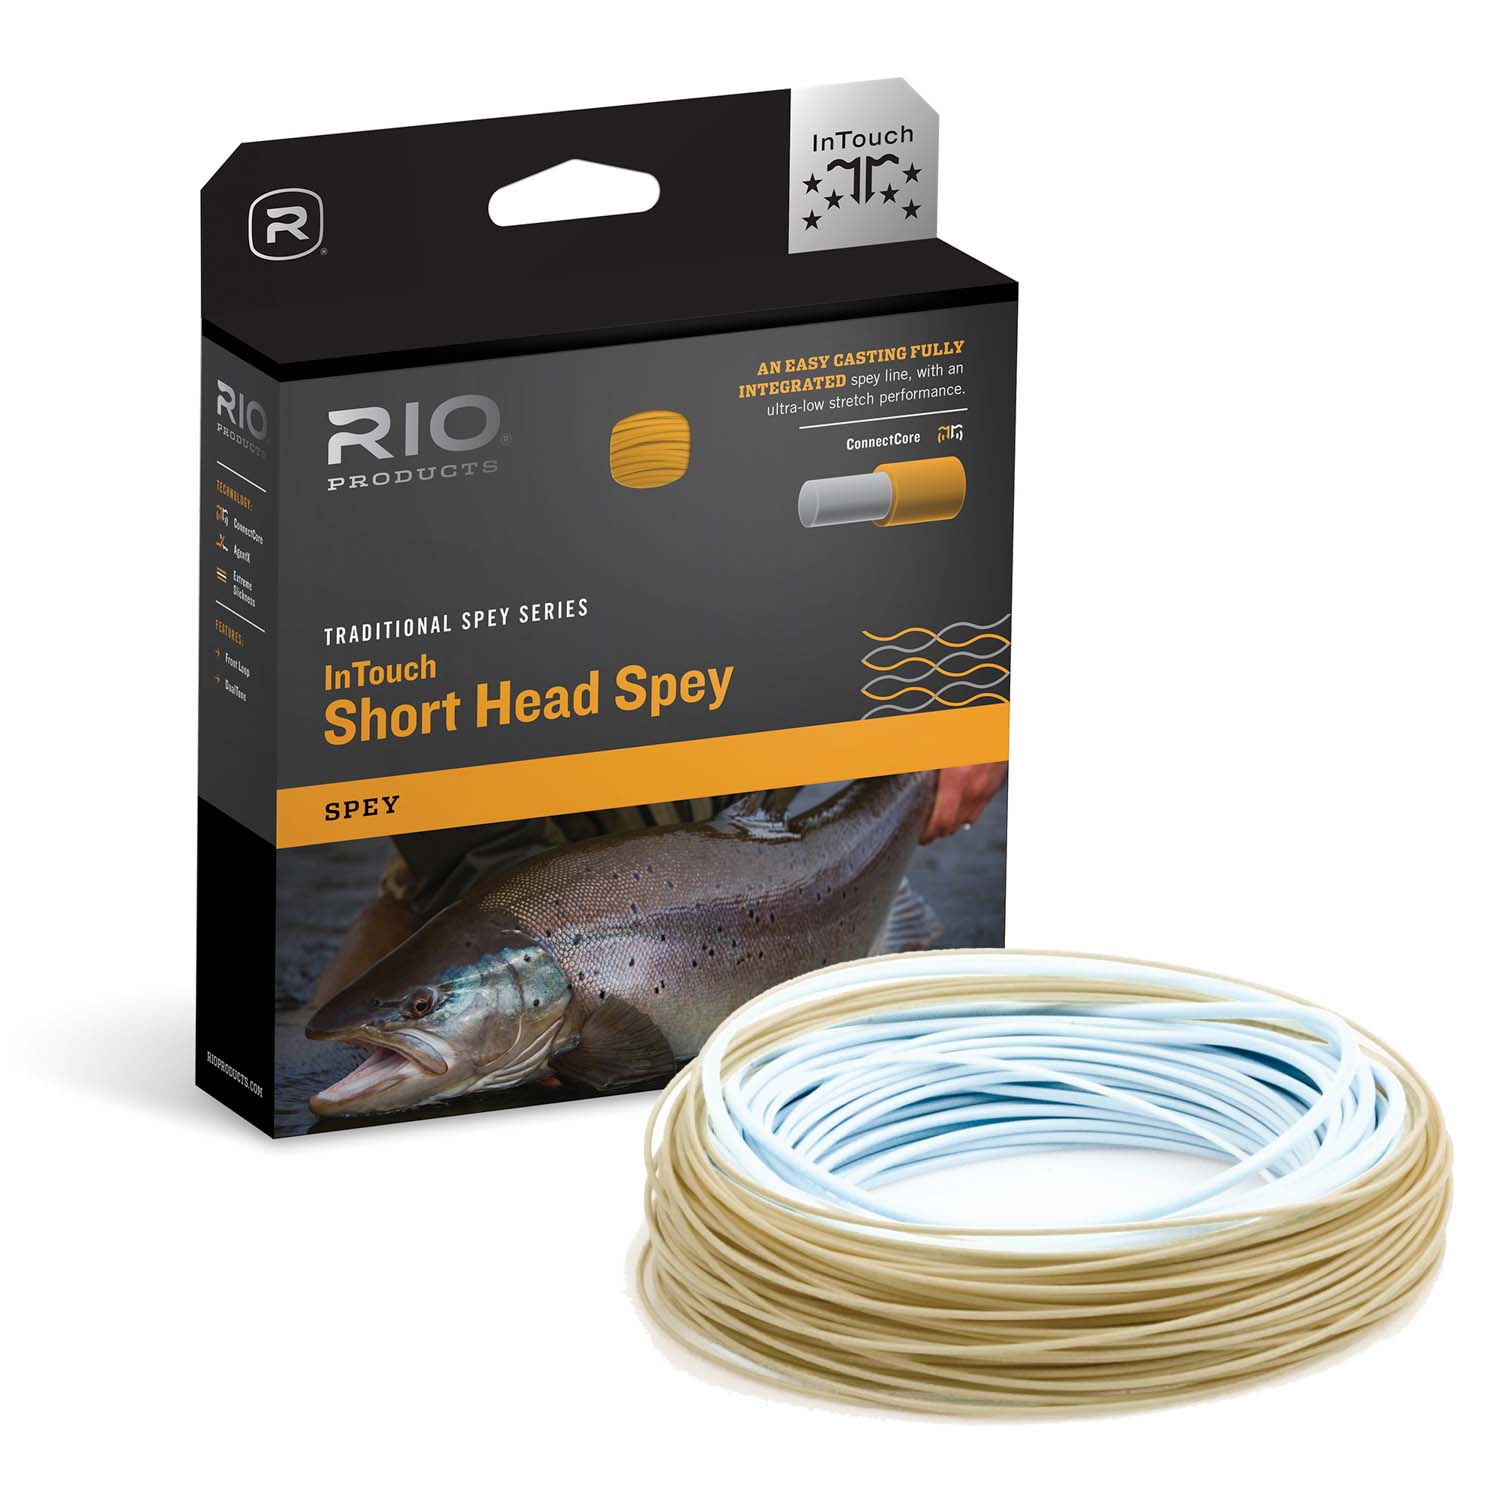 #10/11 #9/10 RIO InTouch Short Head Spey Line #8/9 